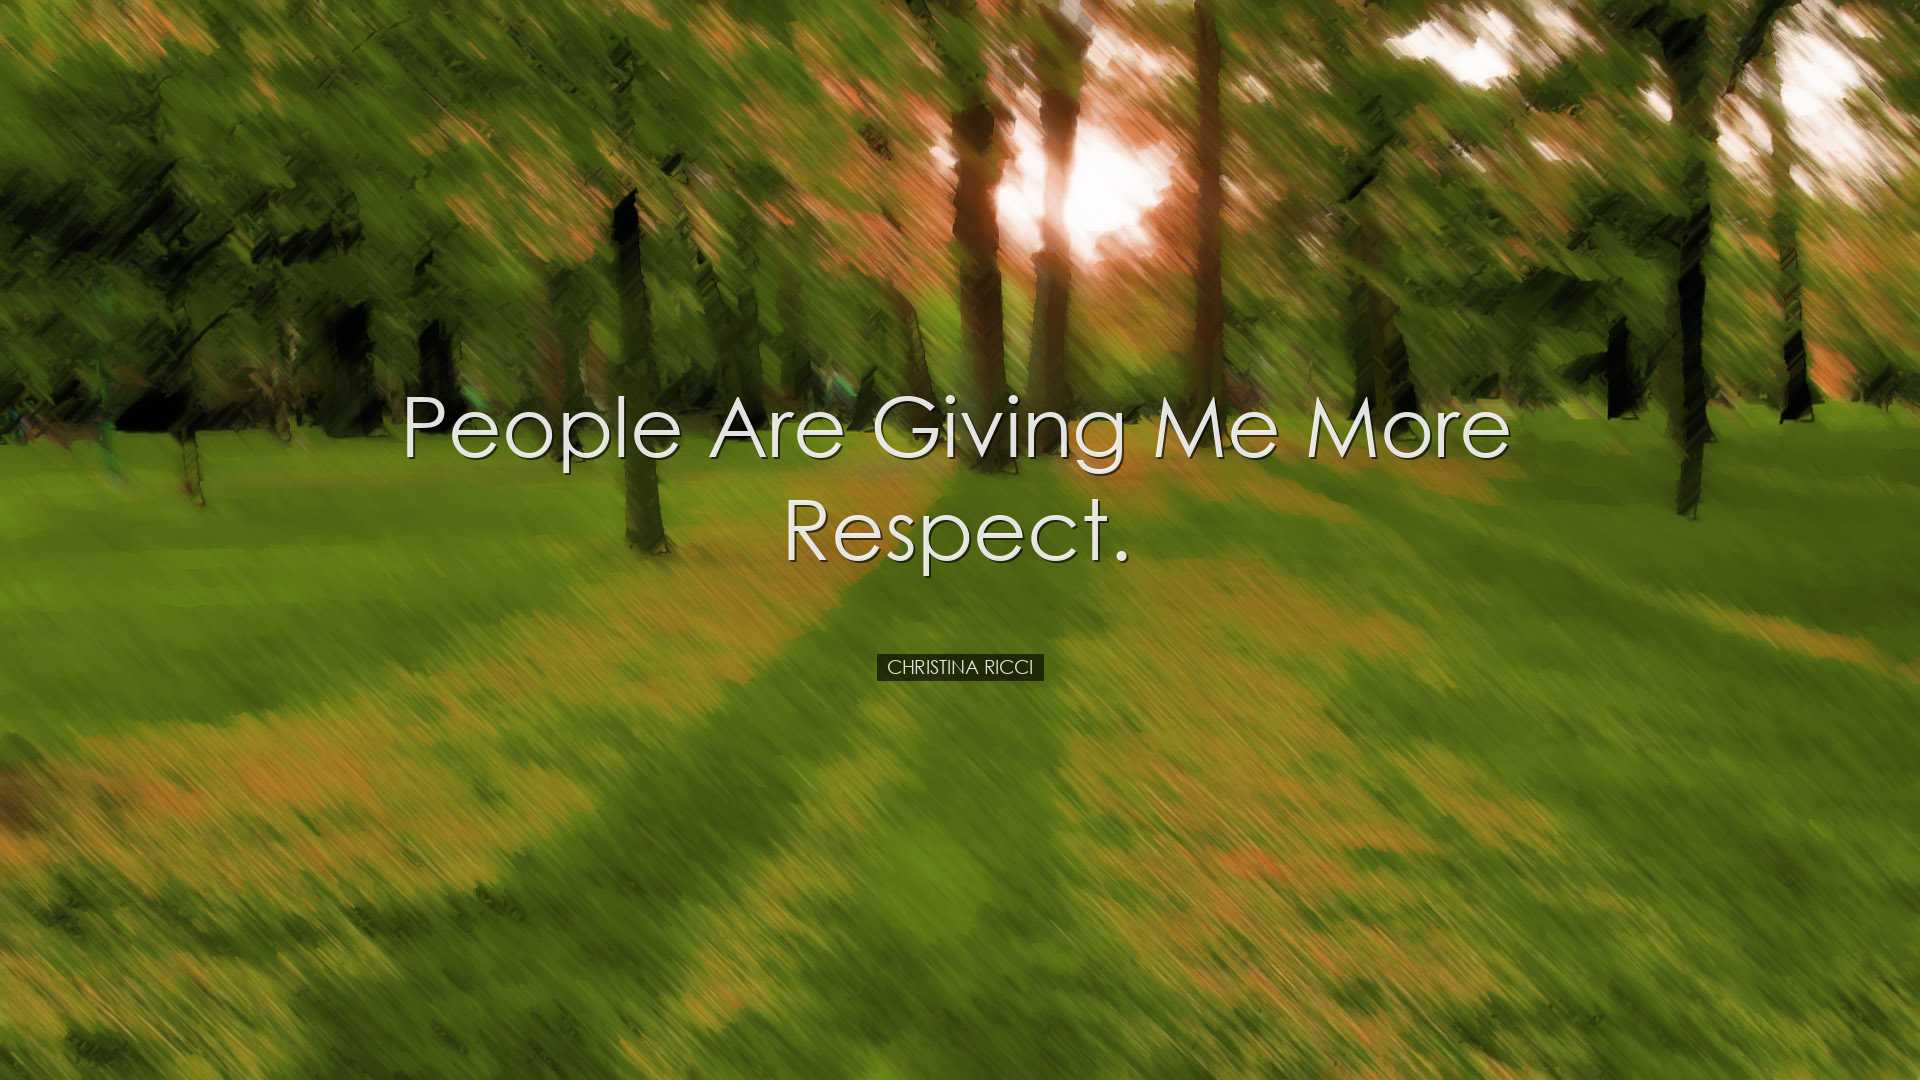 People are giving me more respect. - Christina Ricci